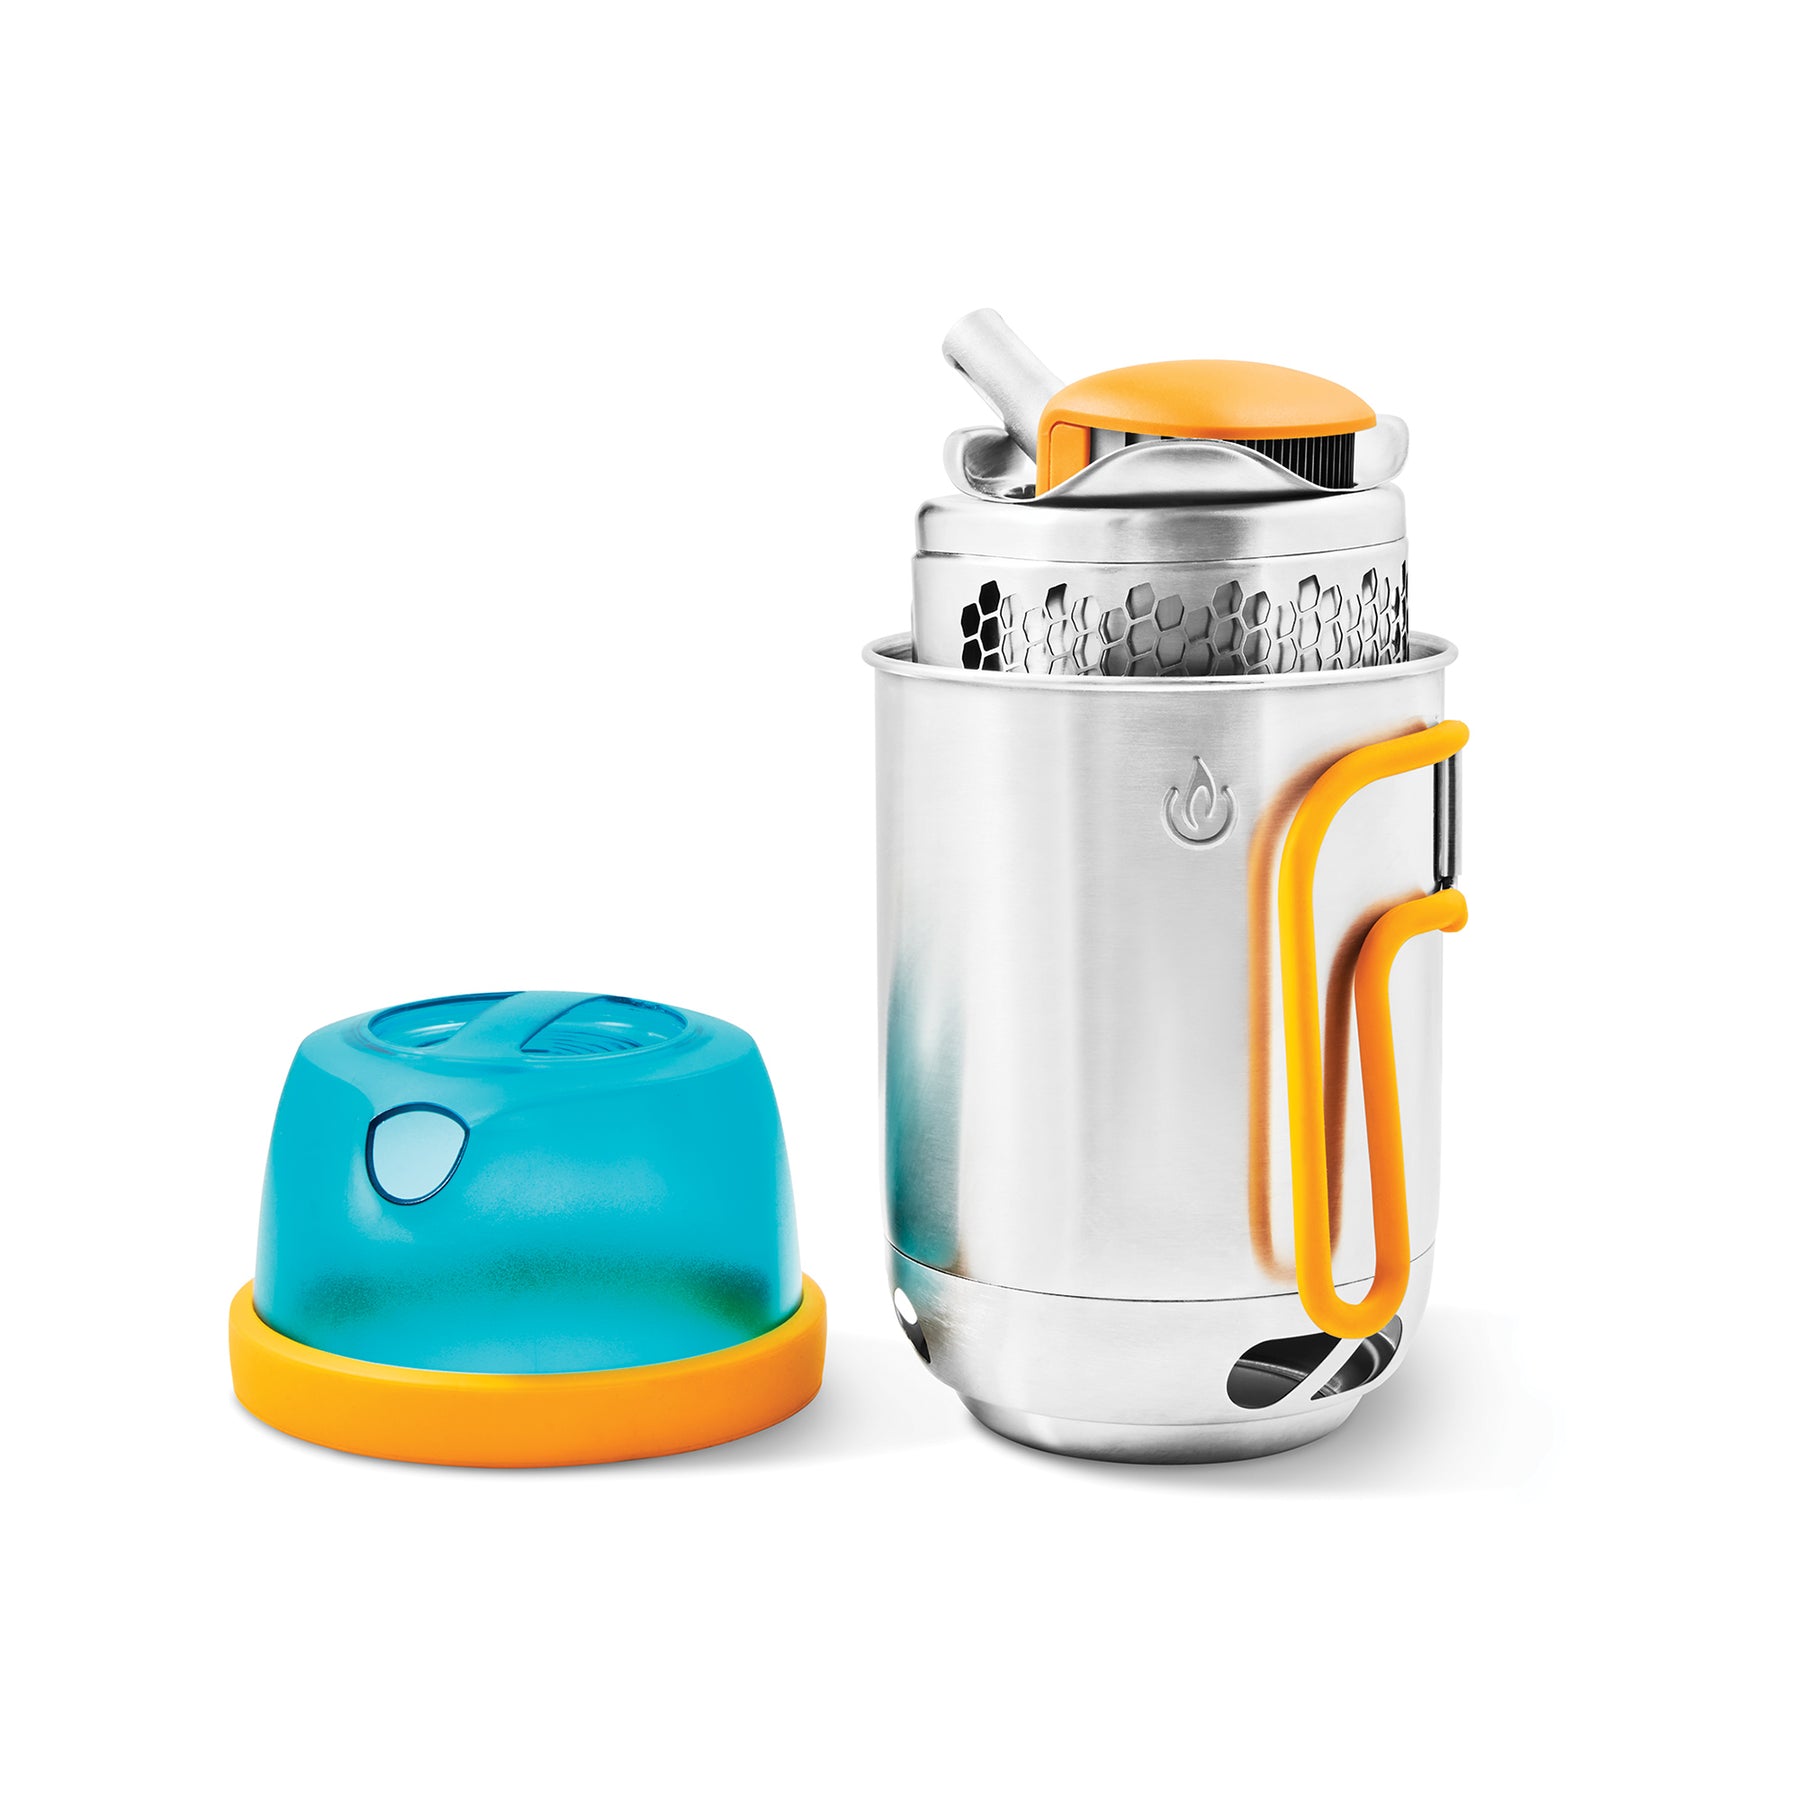 Wiolite Campstove fits in the coffee pot